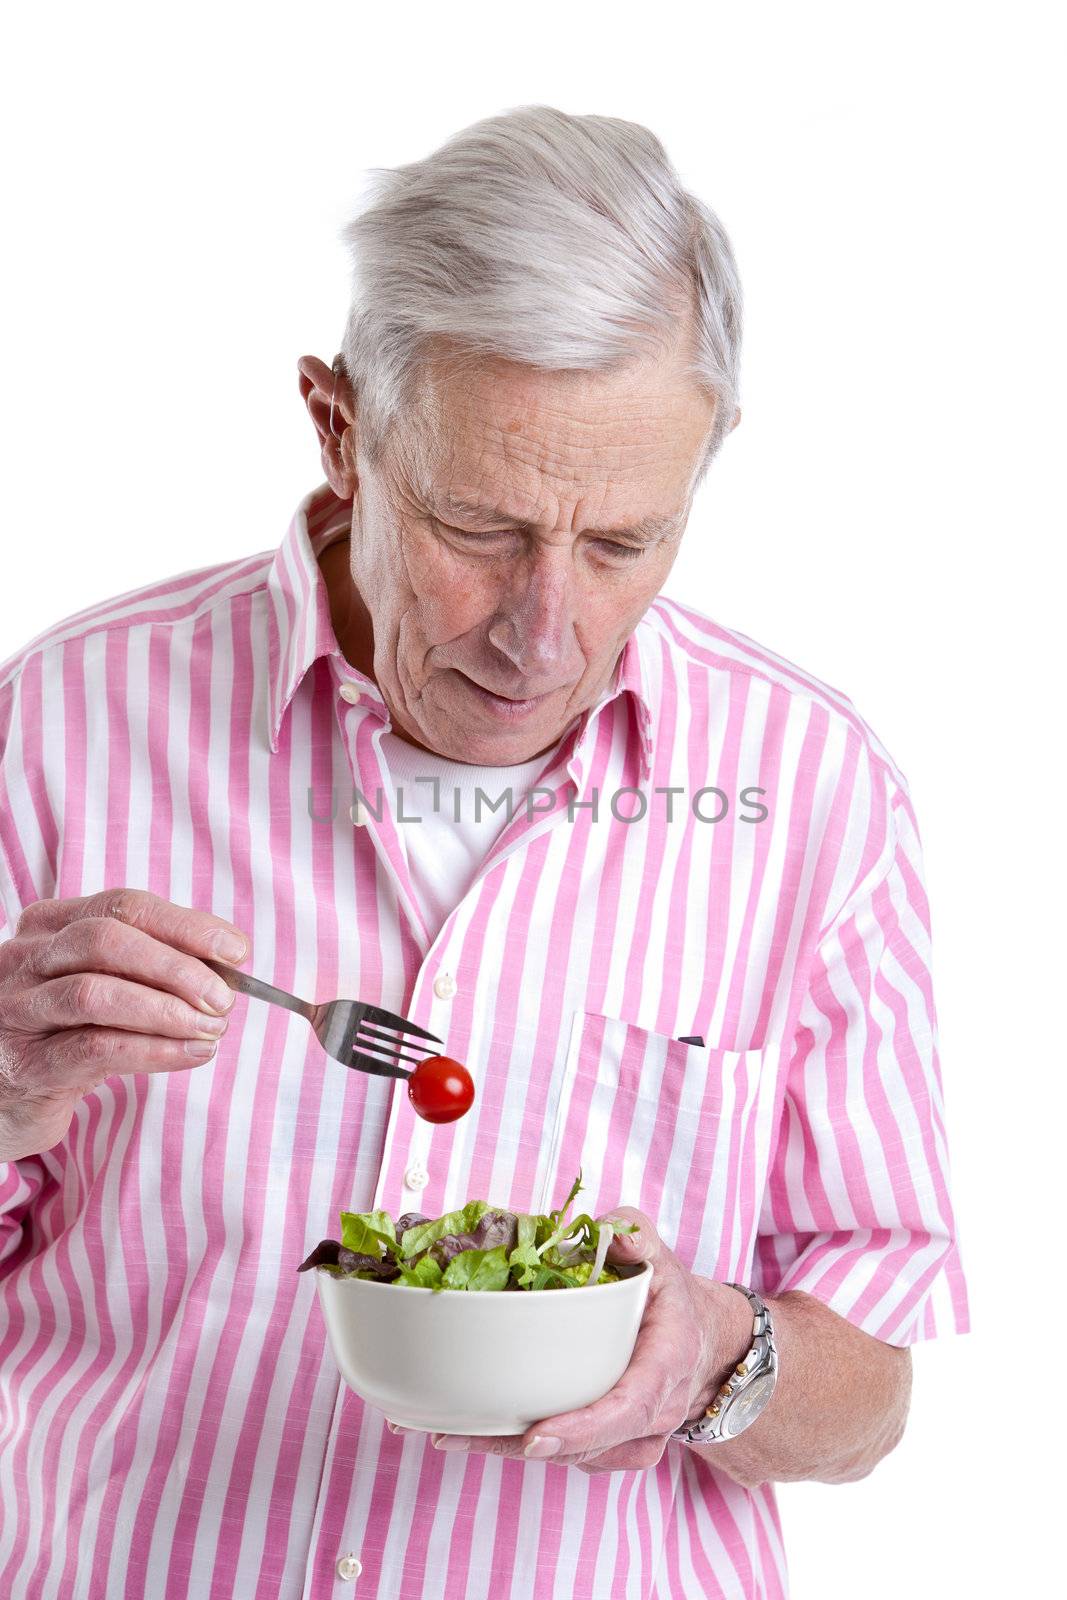 Senior man eating a healthy green salad out of a bowl